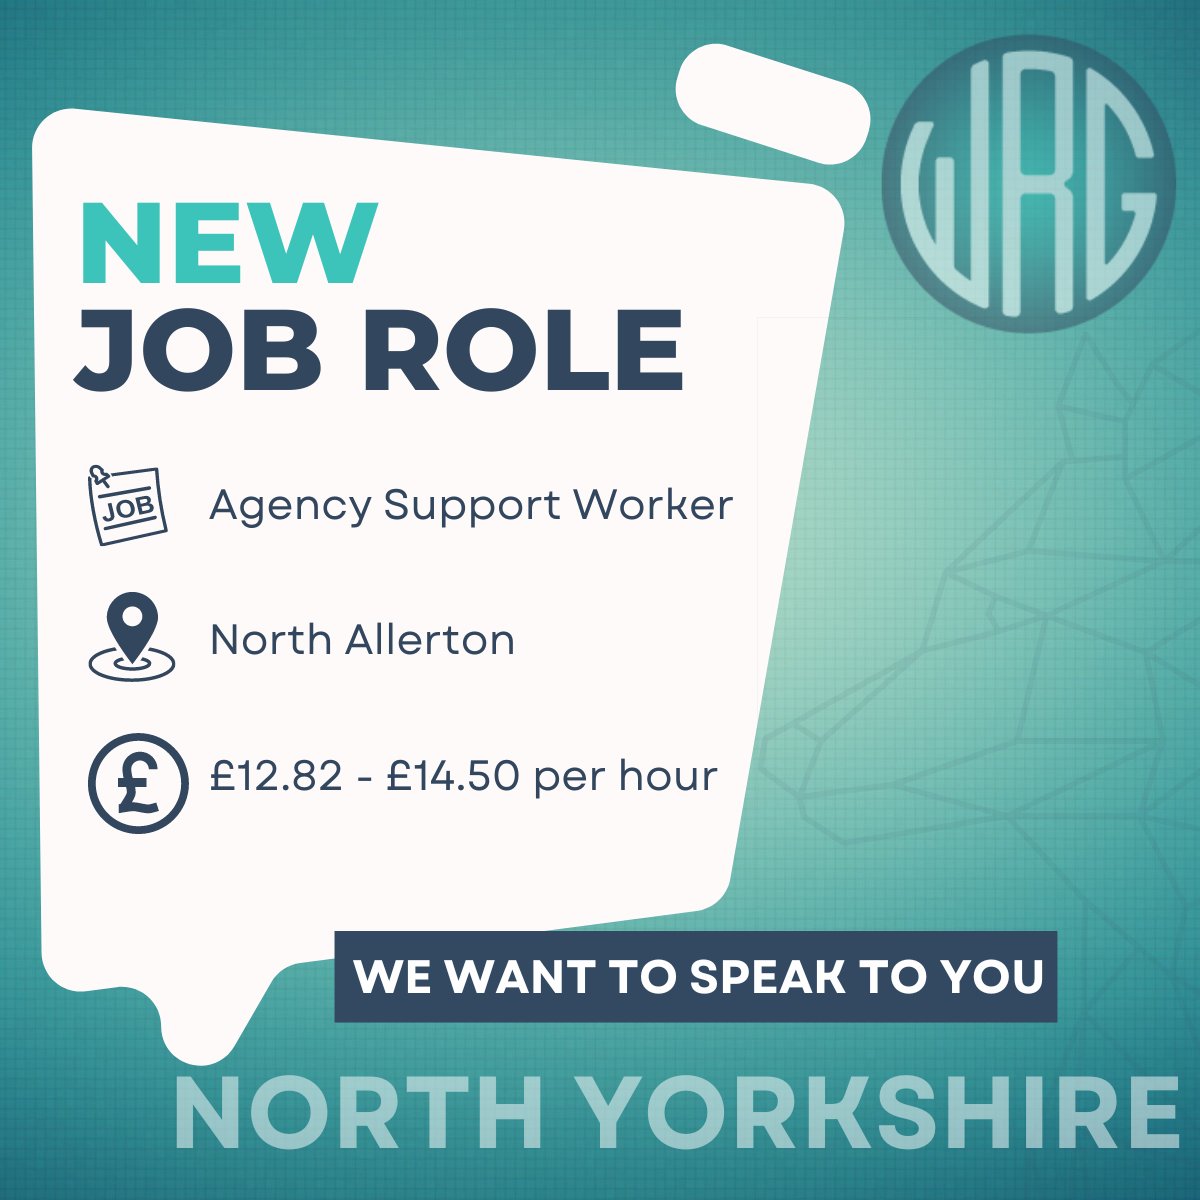 ⭐️Agency Support Worker 
📍North Allerton
💰£12.82 - £14.50
✔️Full-time and part-time hours available

Click here to apply now! adr.to/7mguaai

#SupportWorker #NorthAllertonJobs #adultsocialcare #makeadifference #wolfjobs #wolfcare